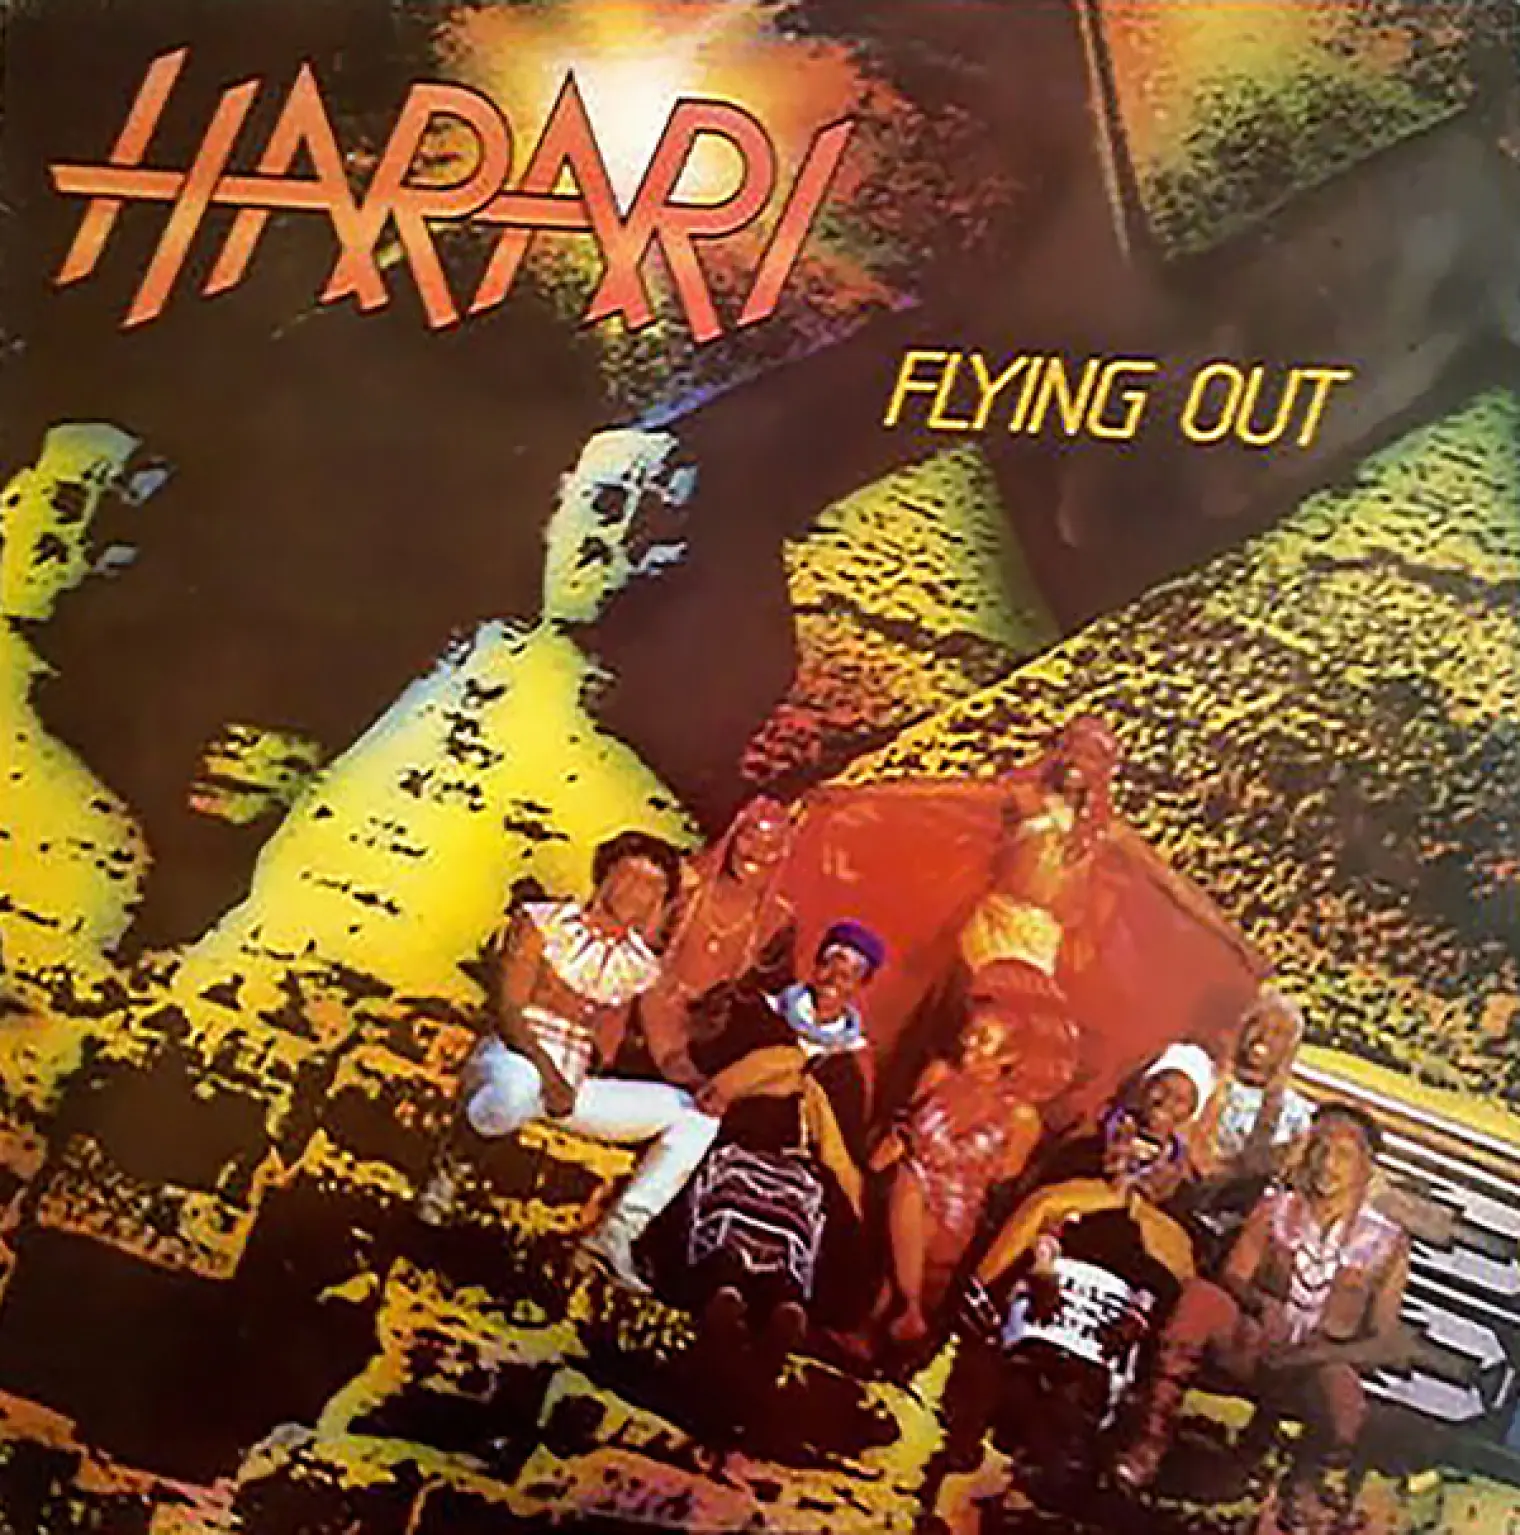 Flying Out -  Harari 